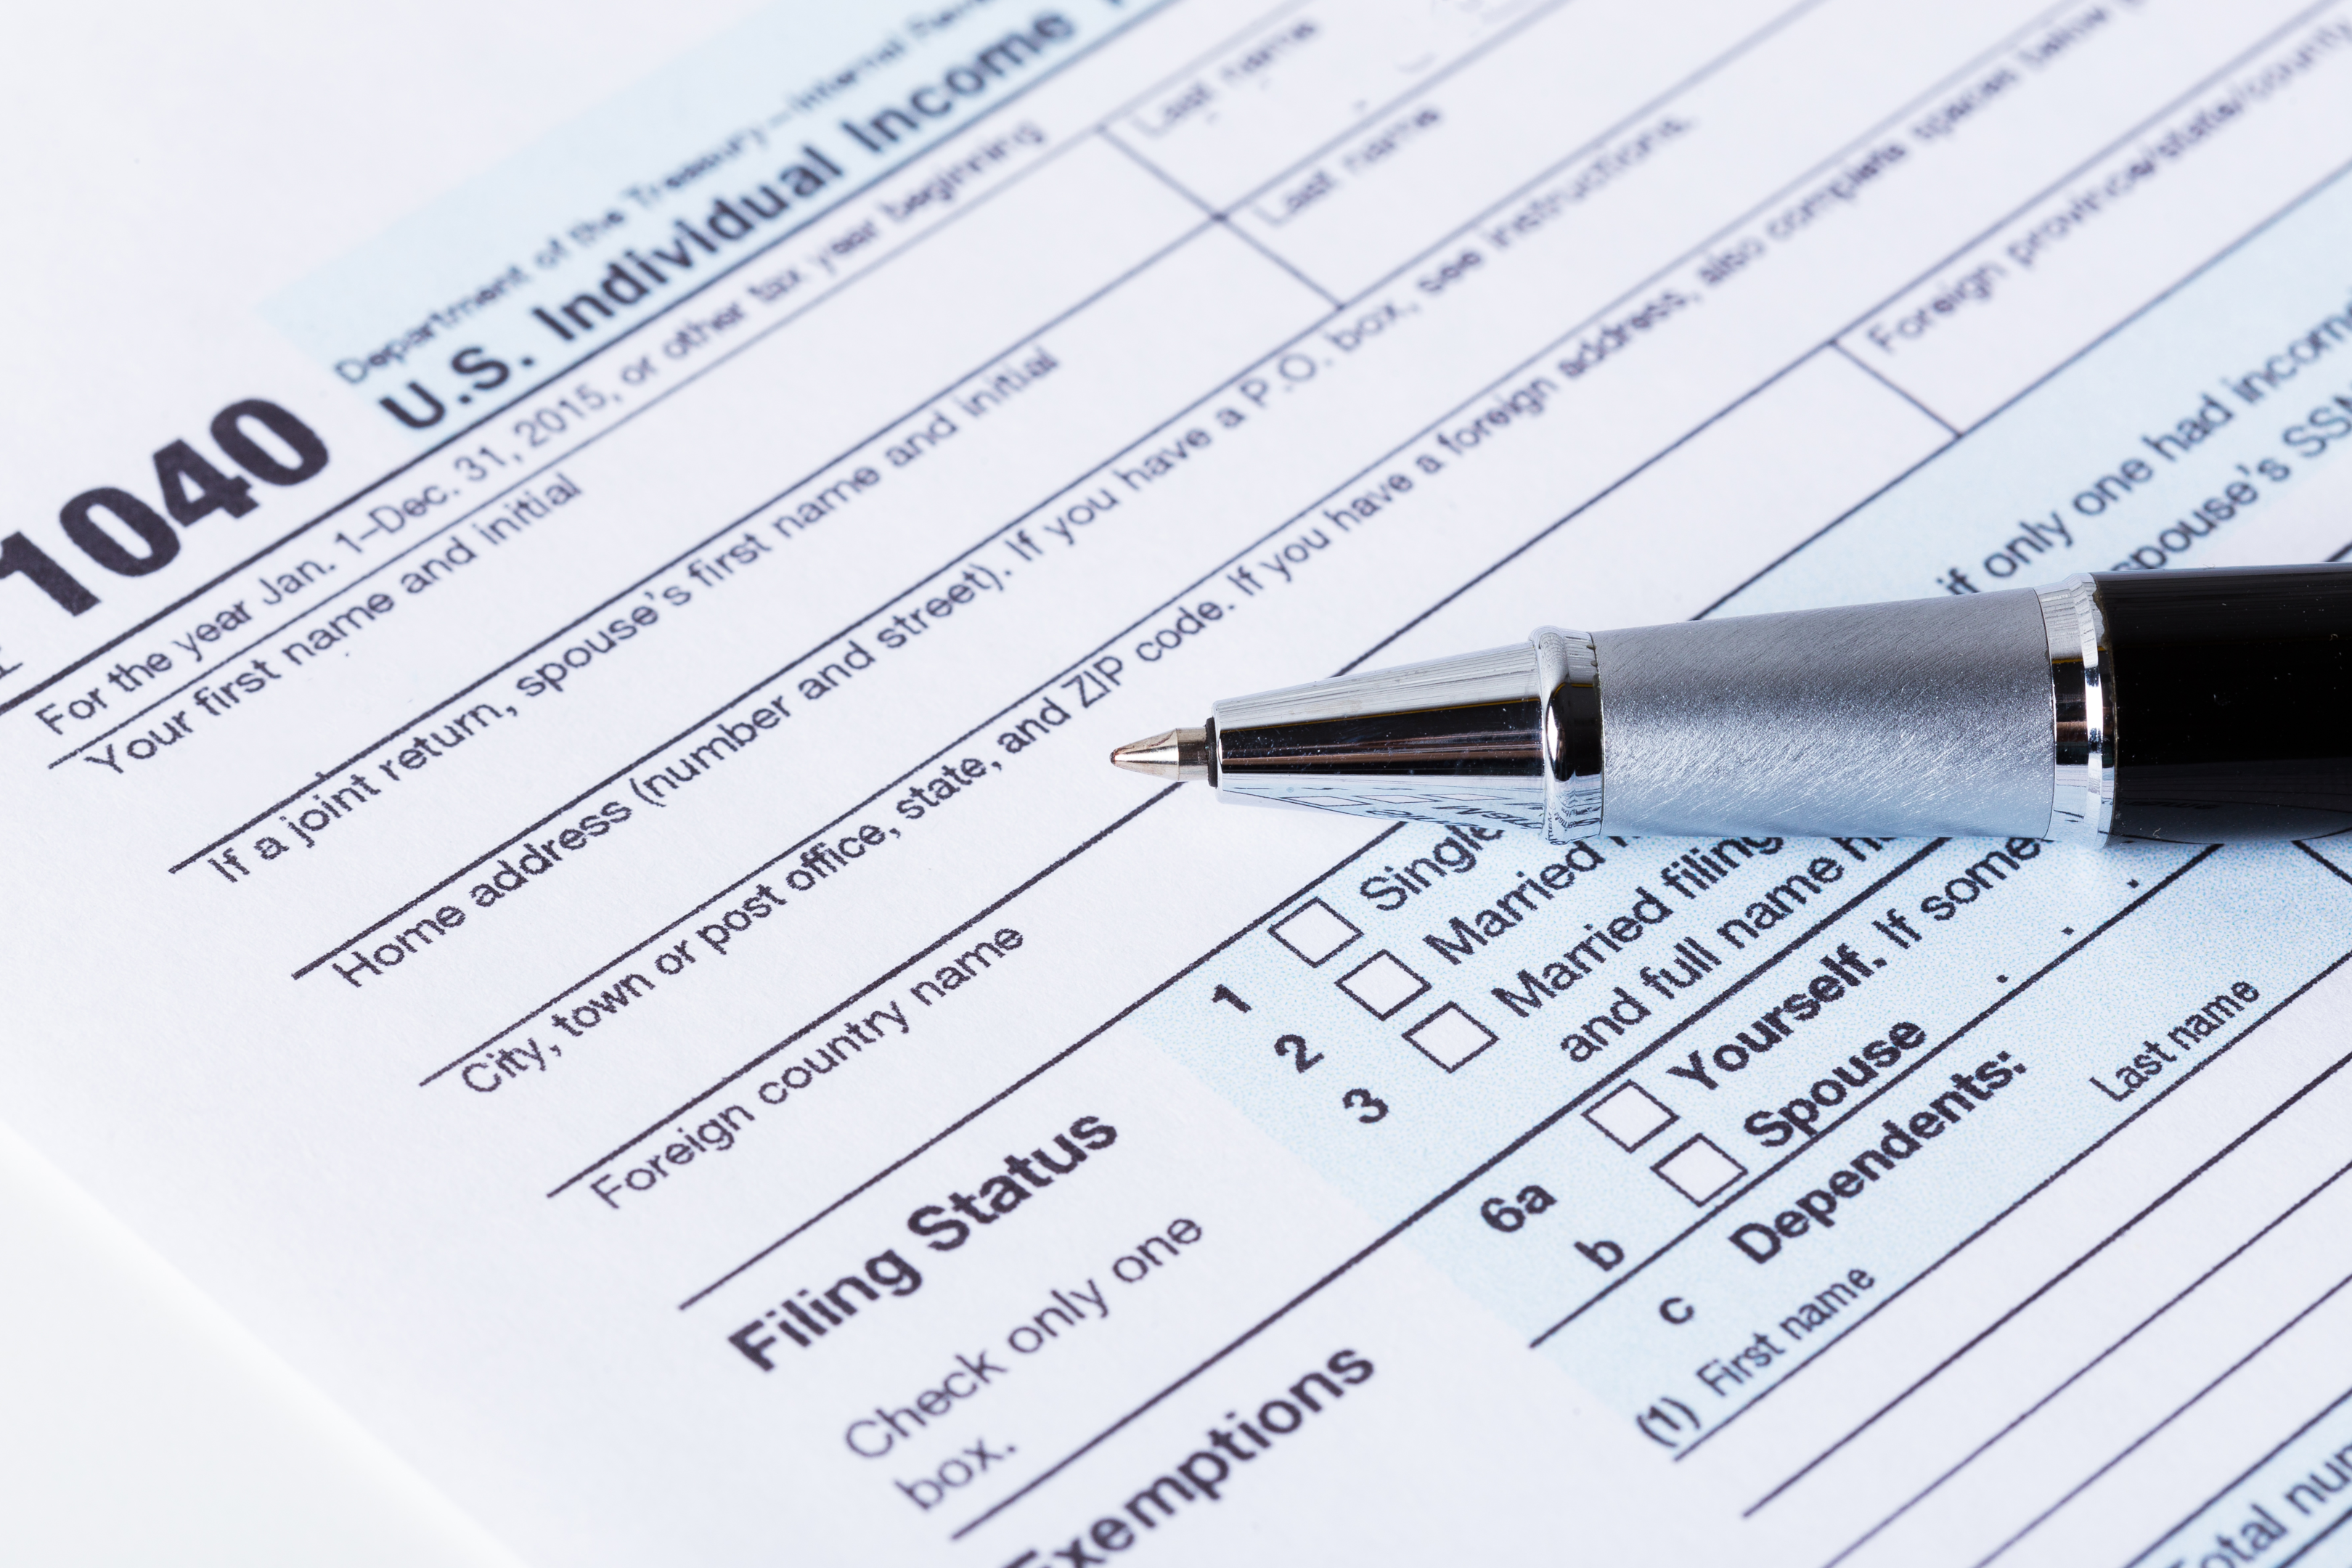 It's important to file tax returns on time to avoid federal tax debt